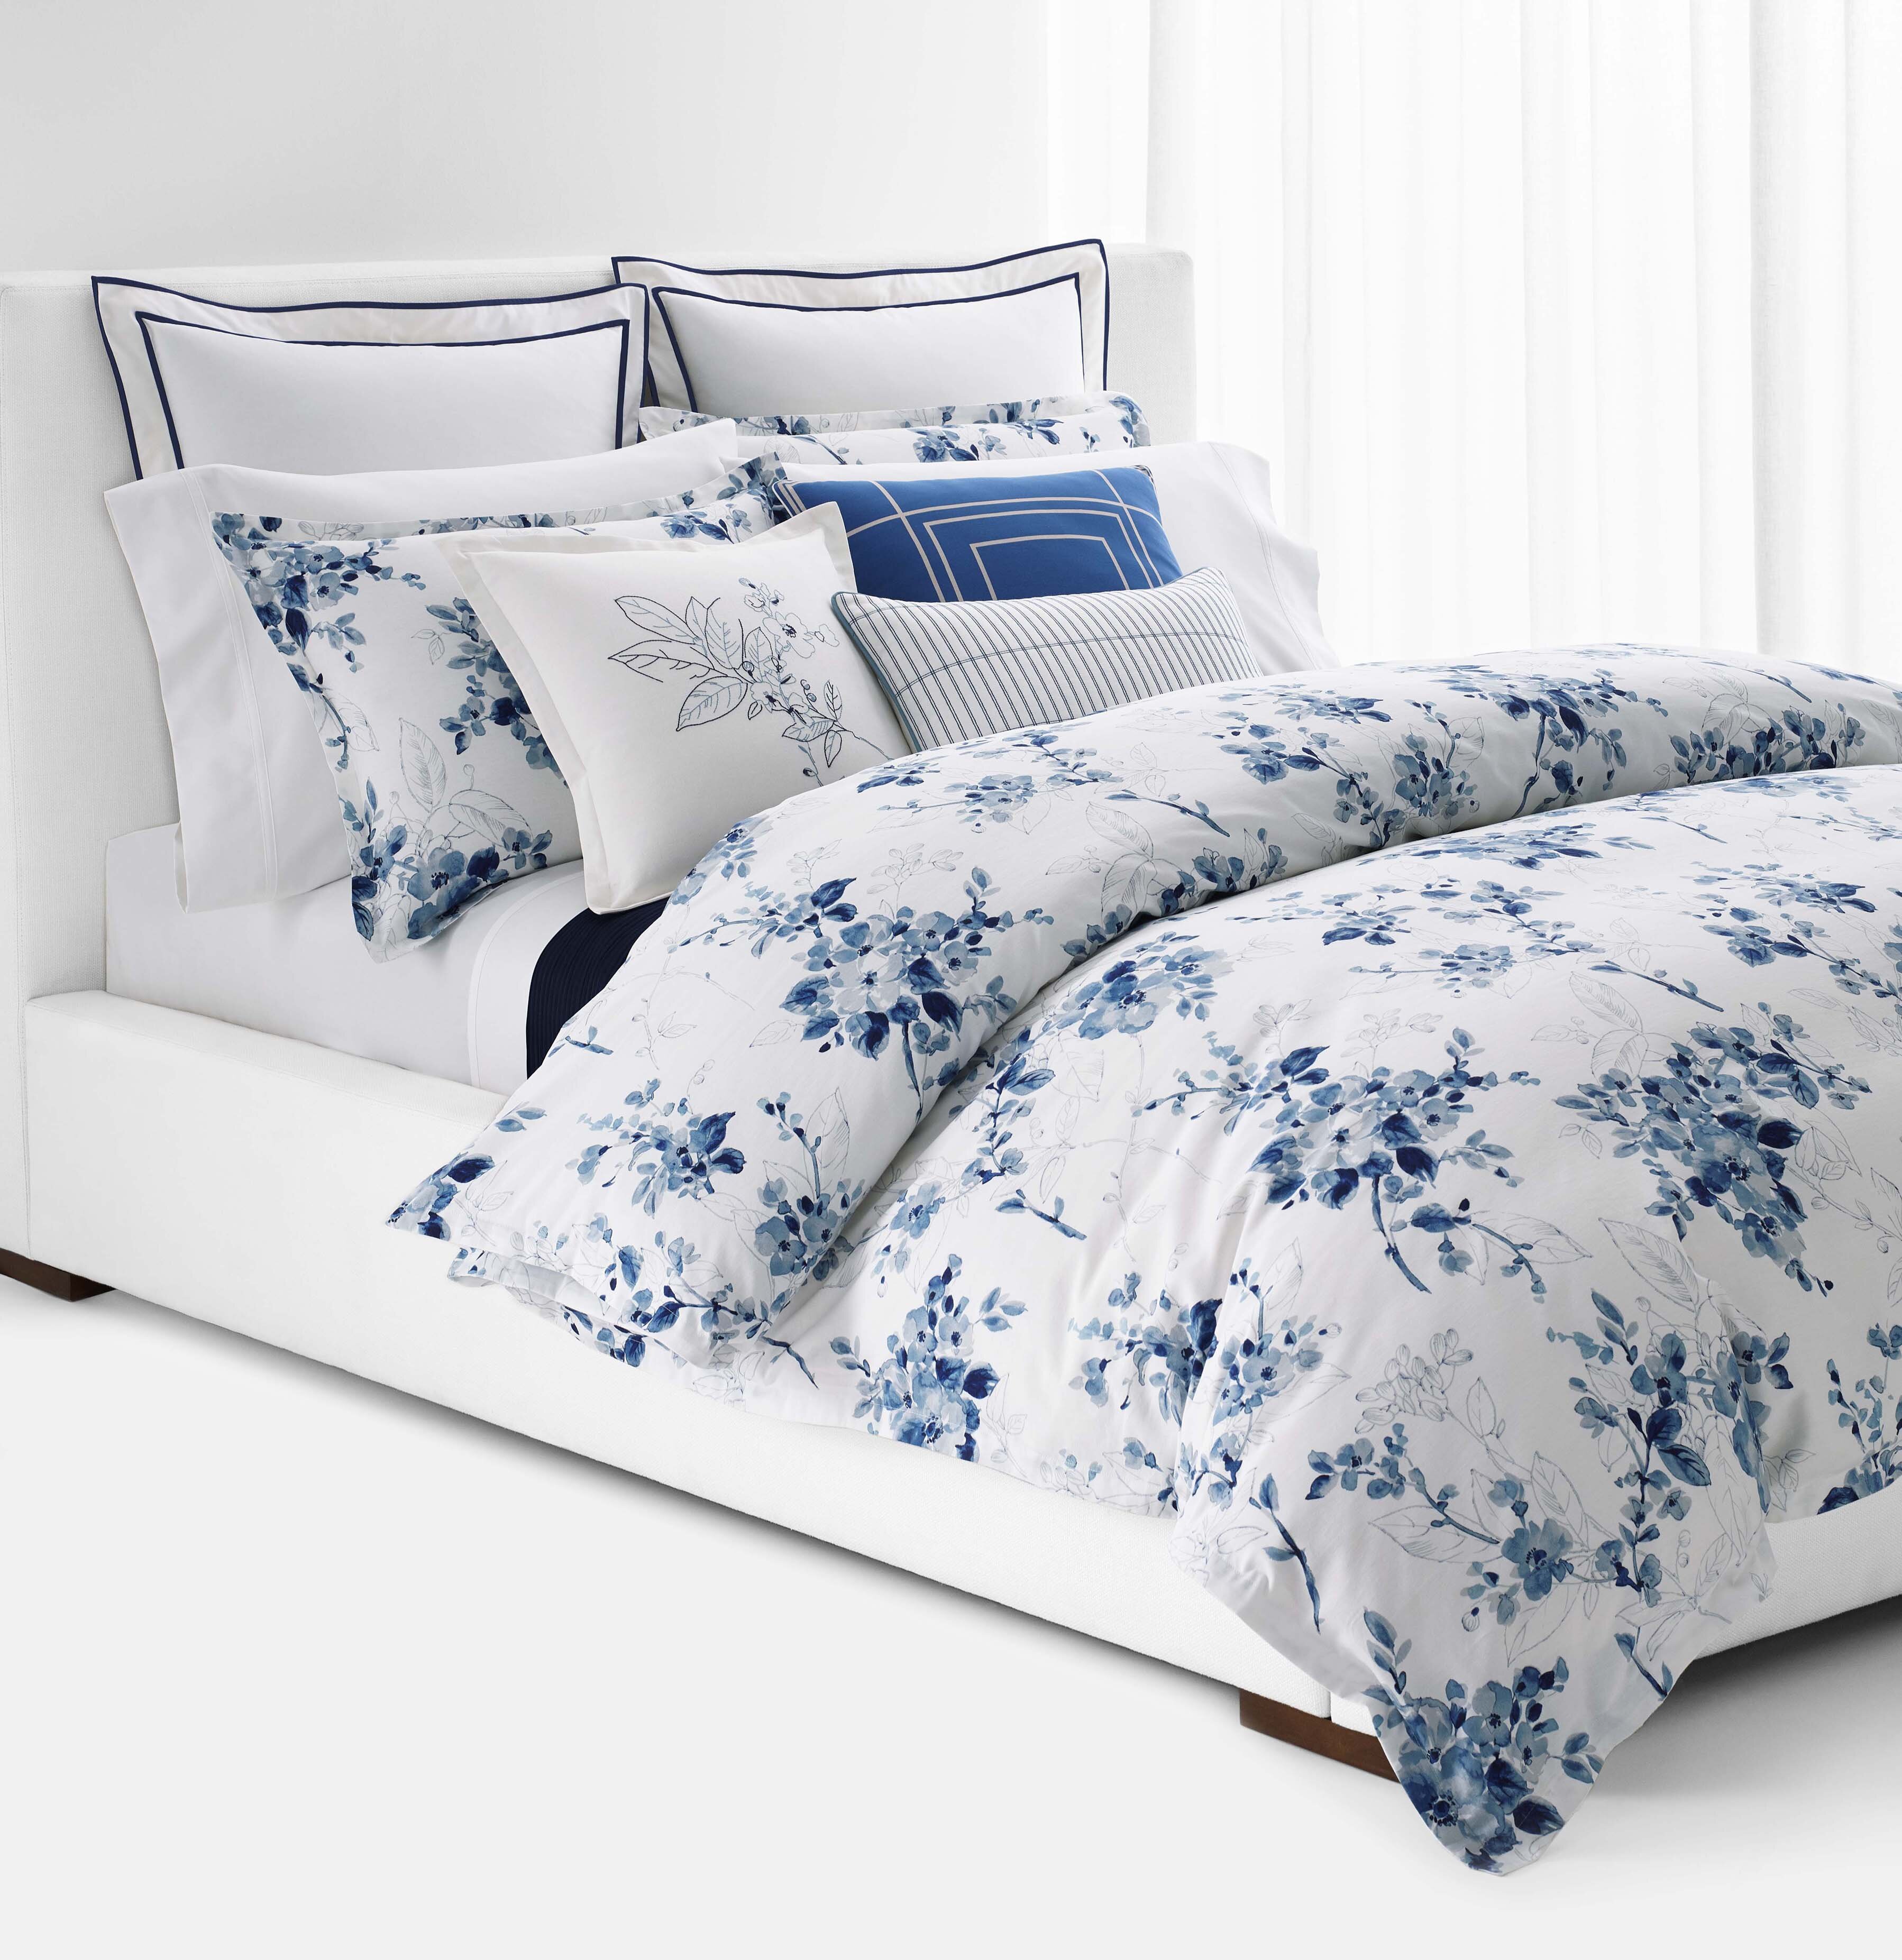 Rough Lauren king duvet cover and two king matching shams